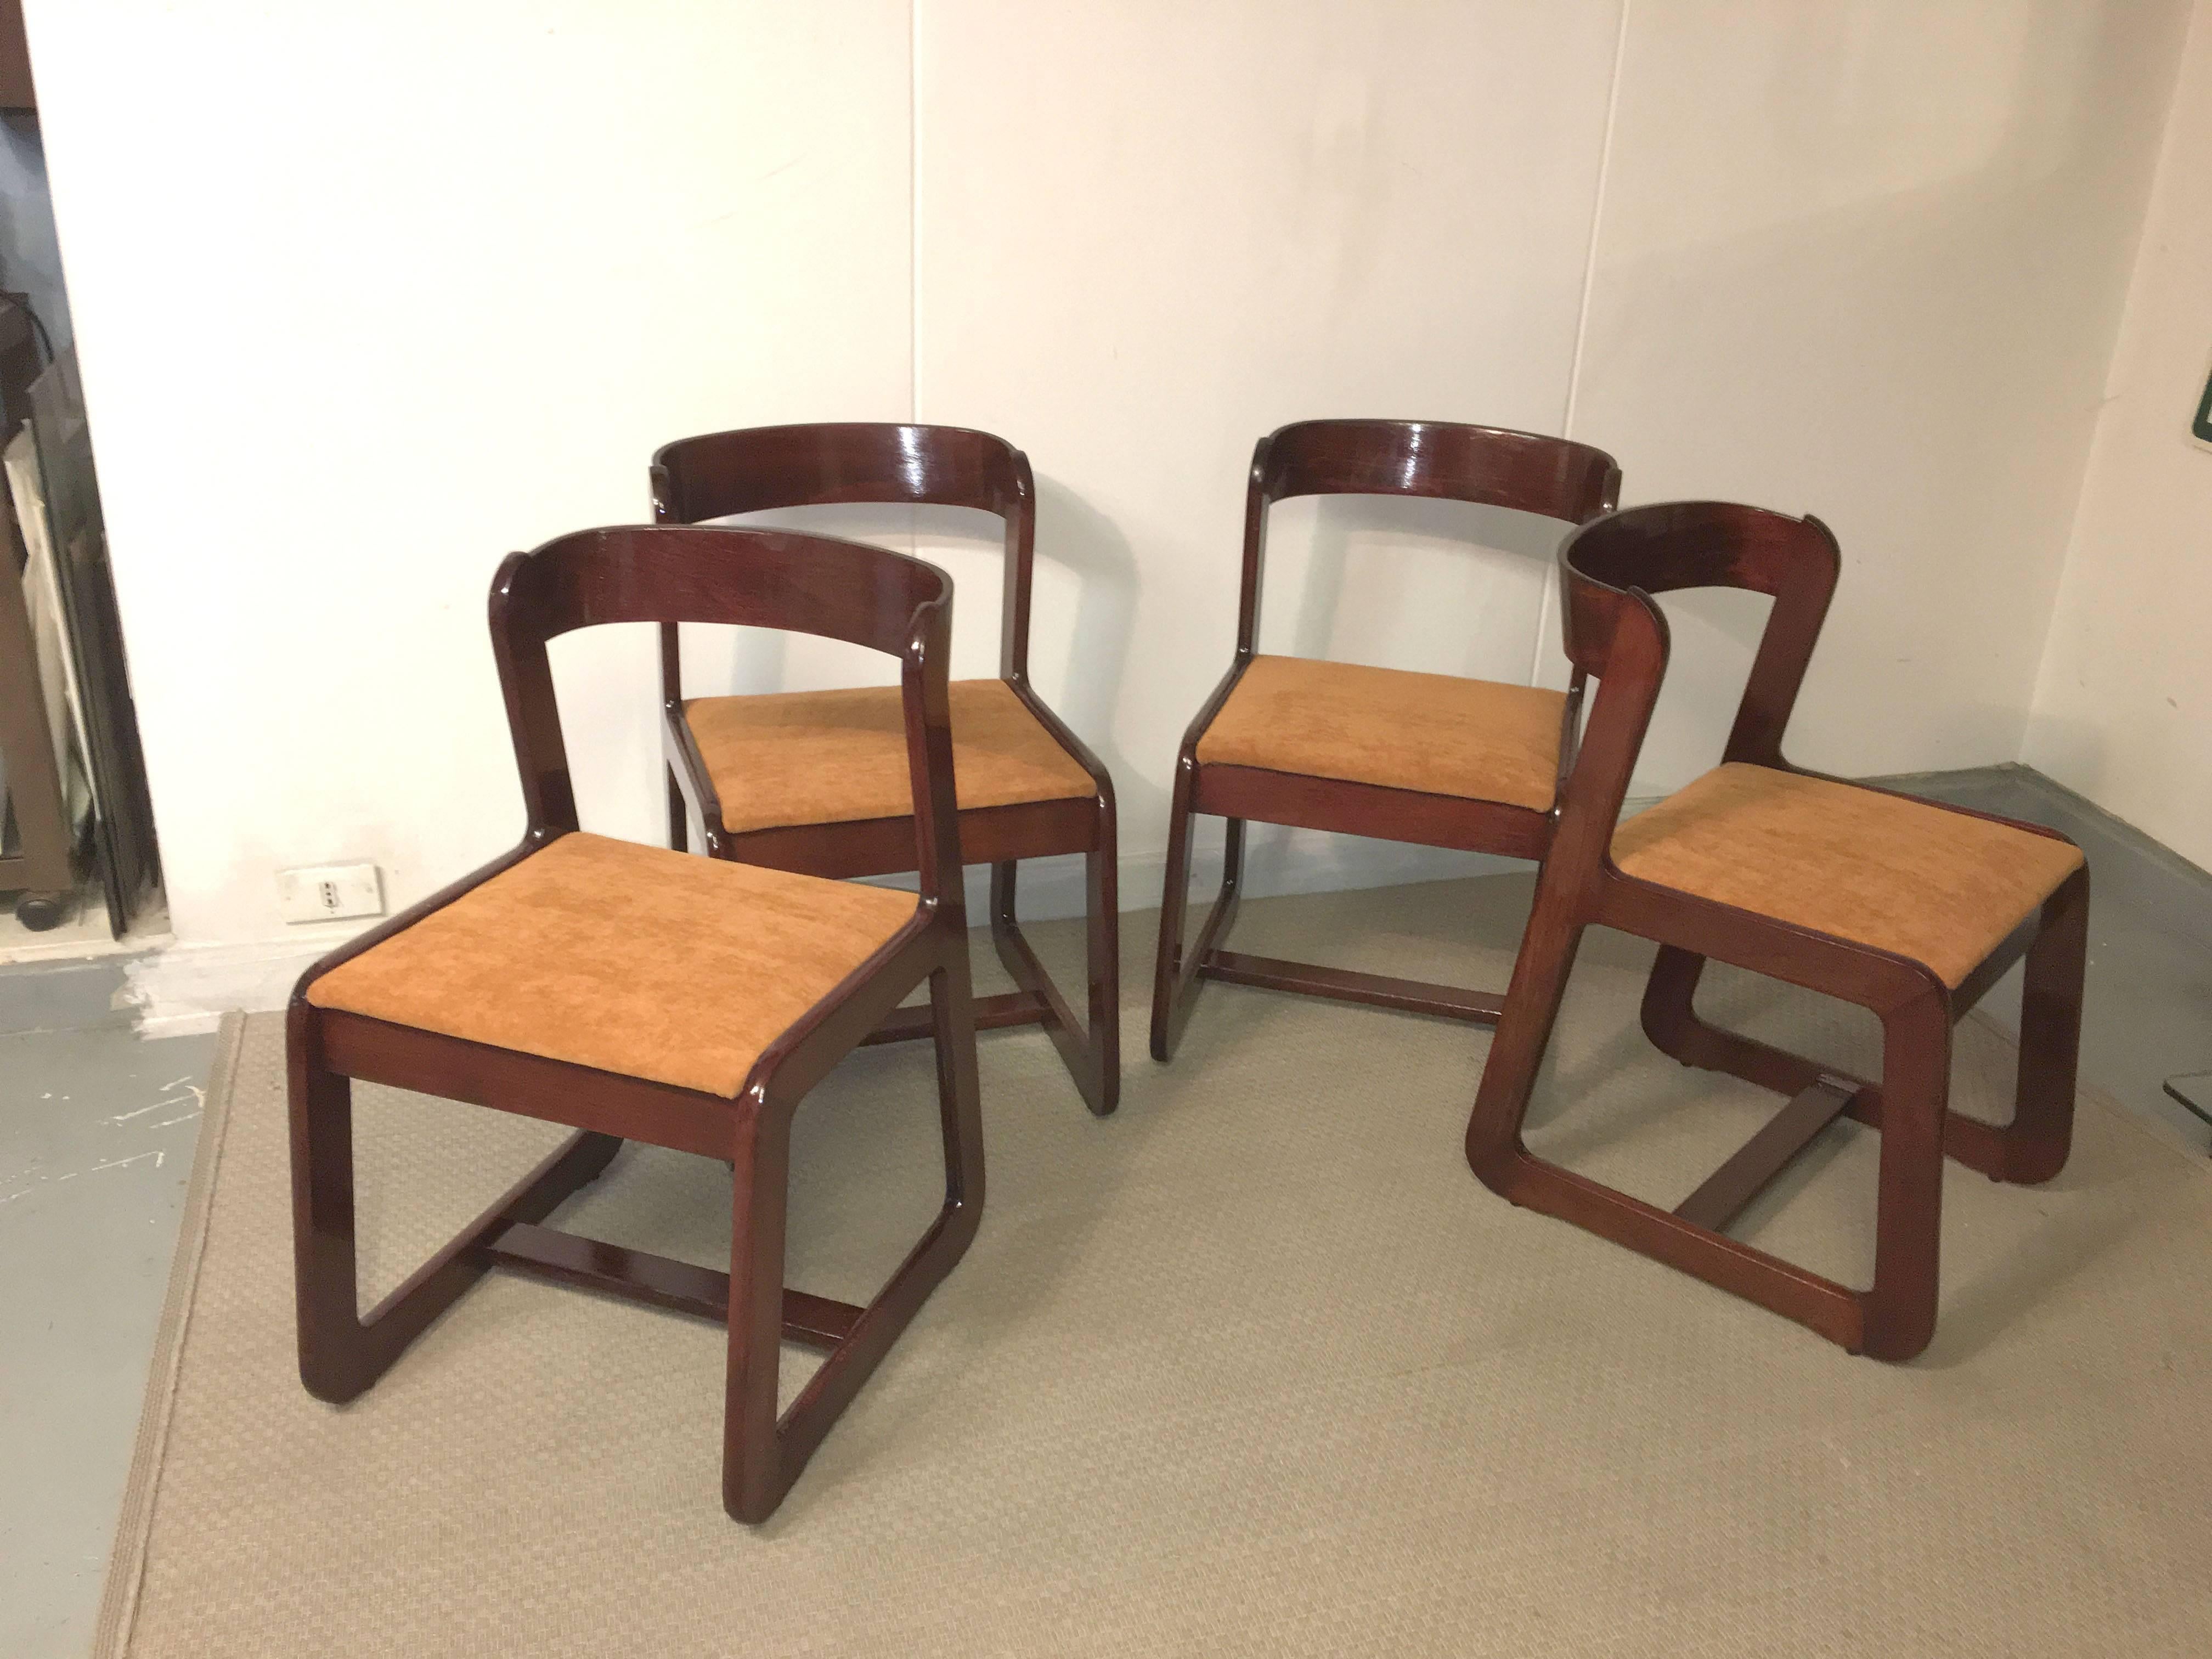 Group of four chairs designed by Willy Rizzo for Mario Sabot. Mahogany frame and velvet seat, Italy, 1970.